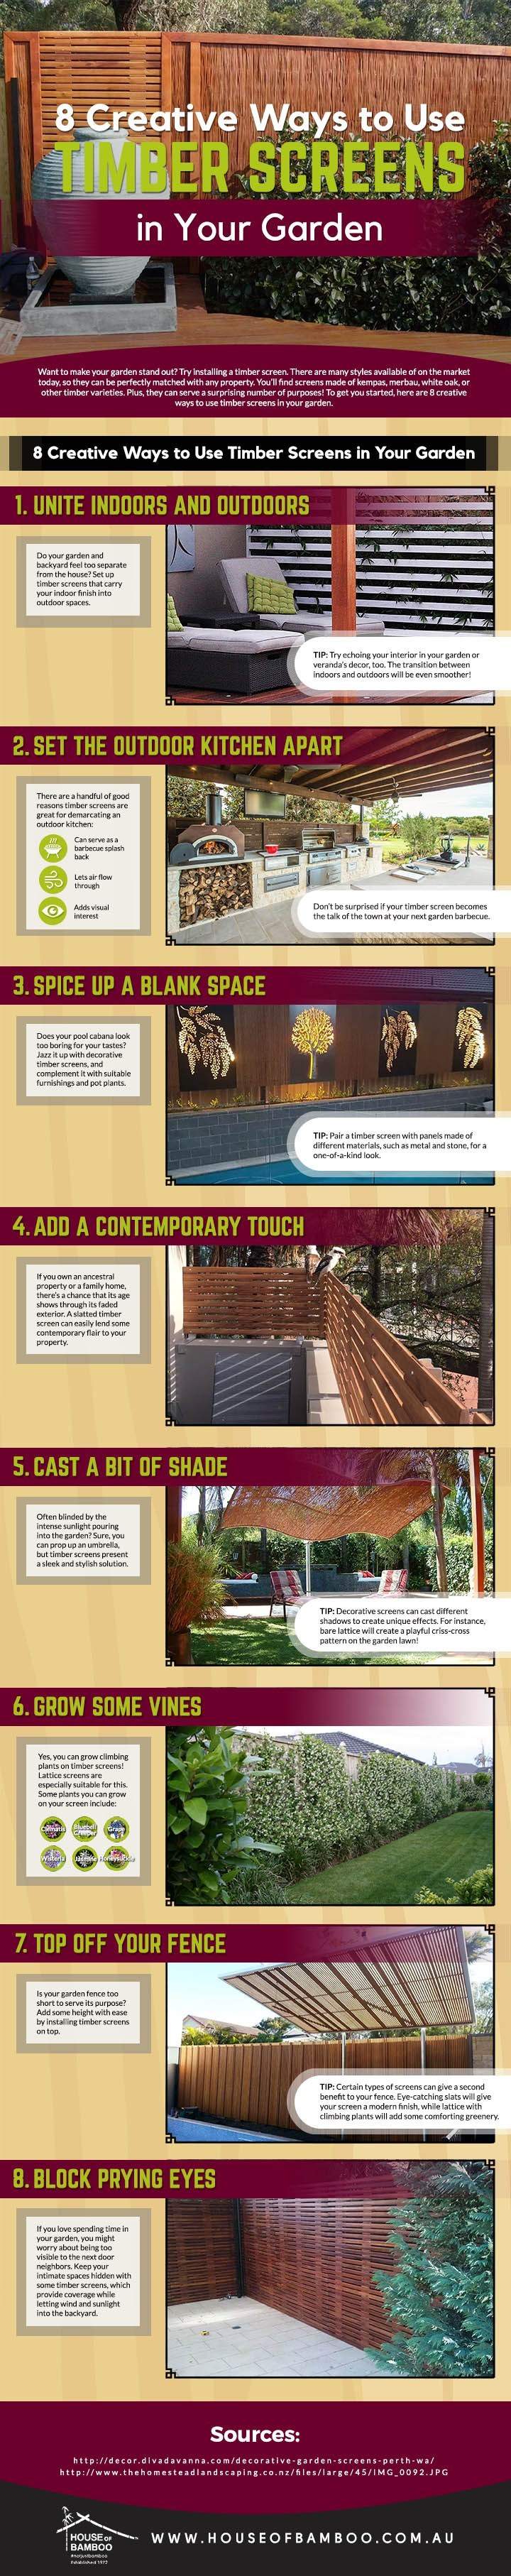 Creative Ways to Use Timber Screens in Your Garden